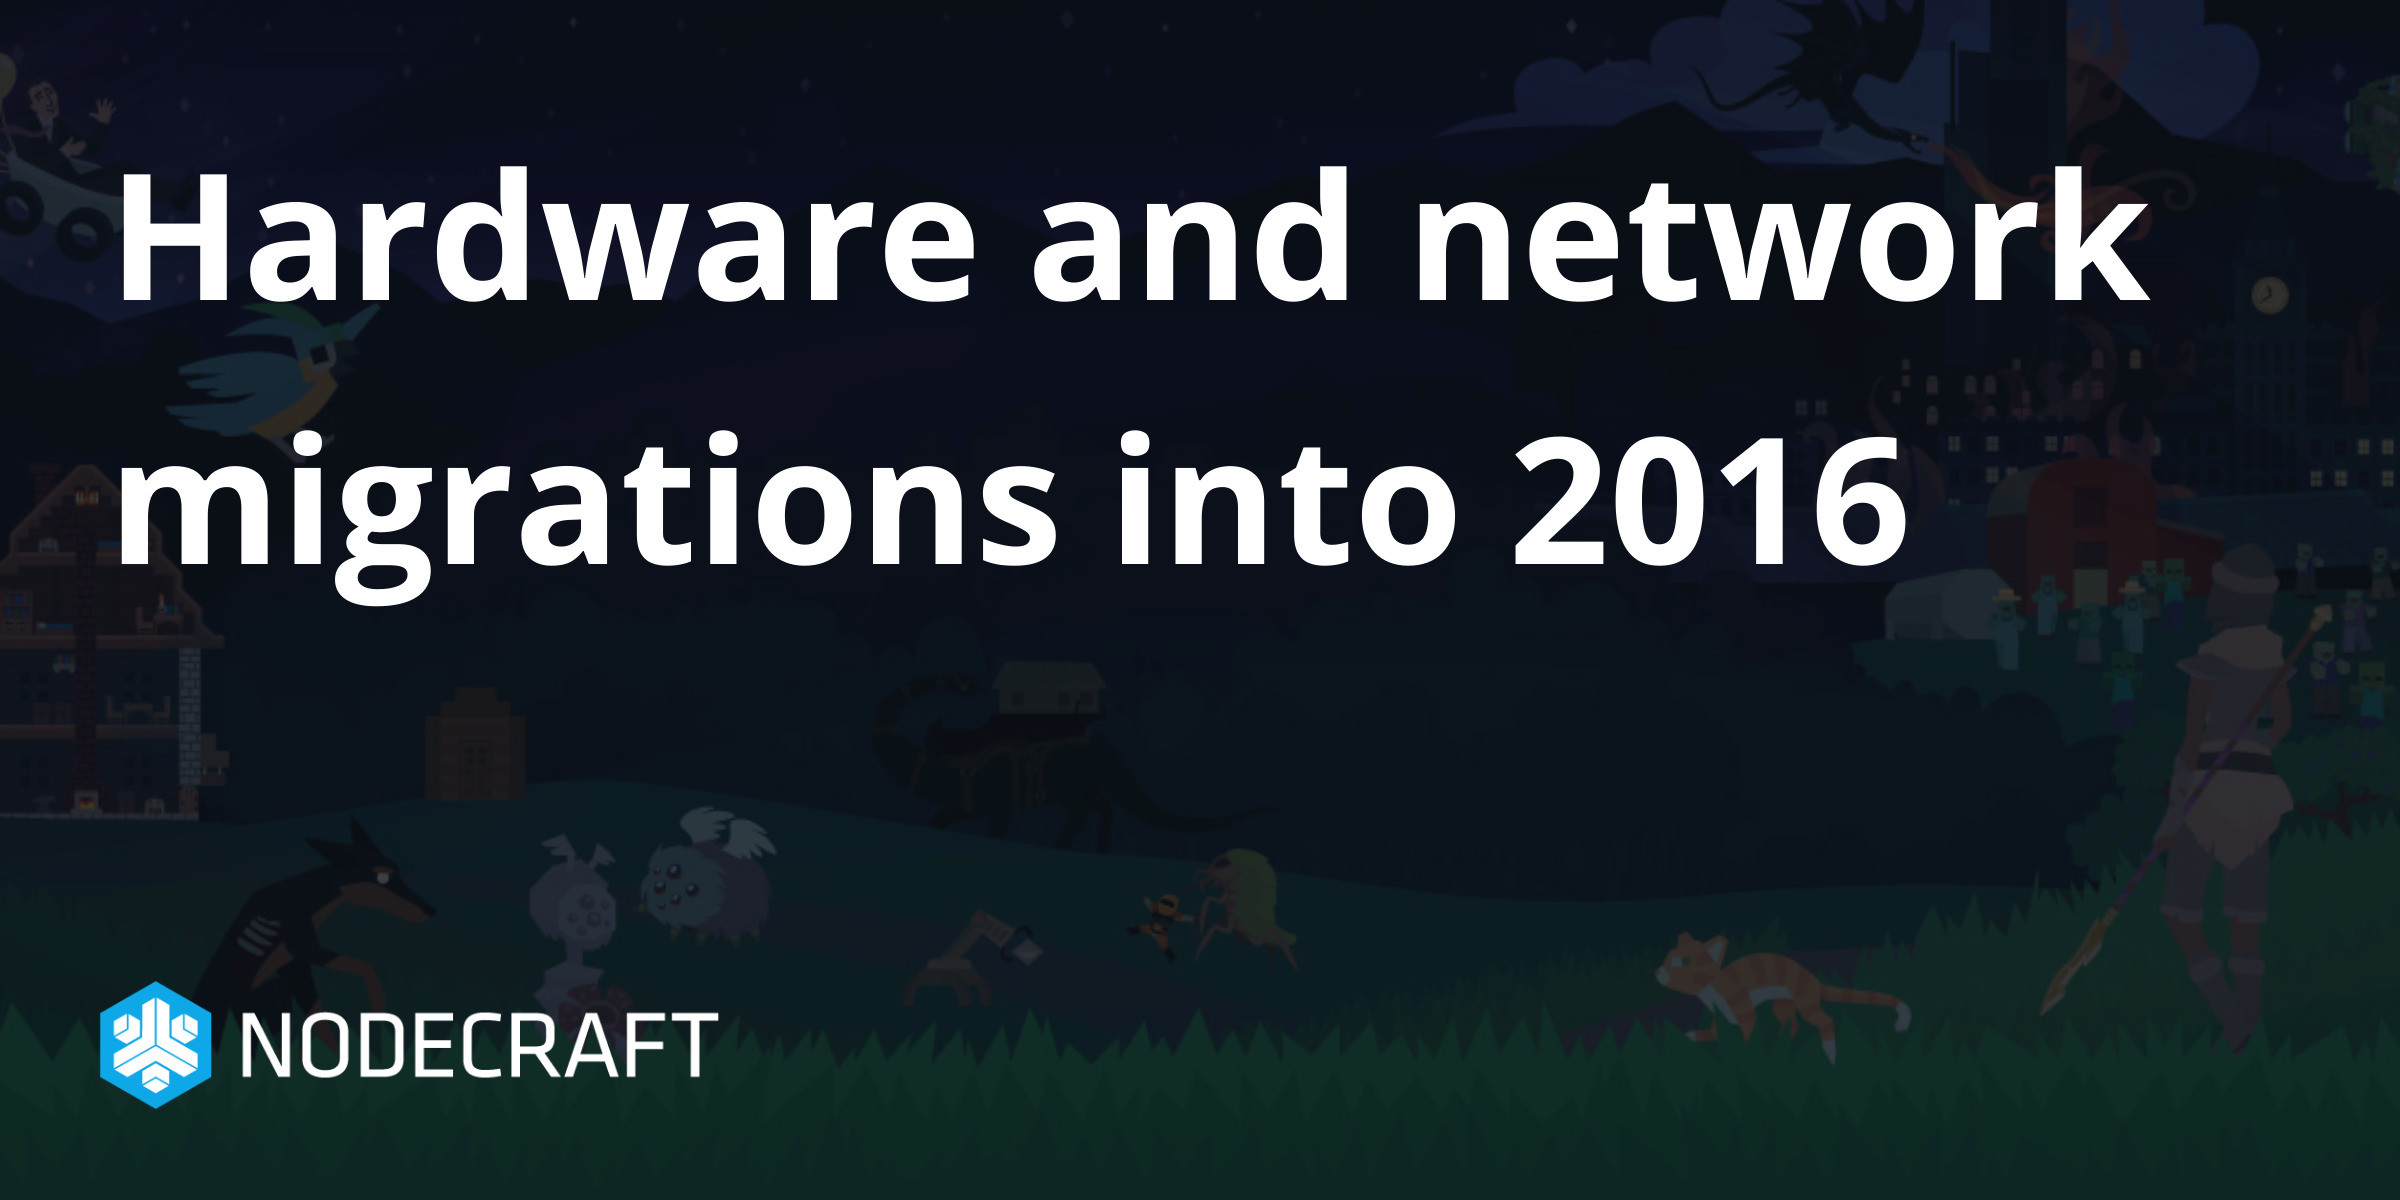 Hardware and network migrations into 2016